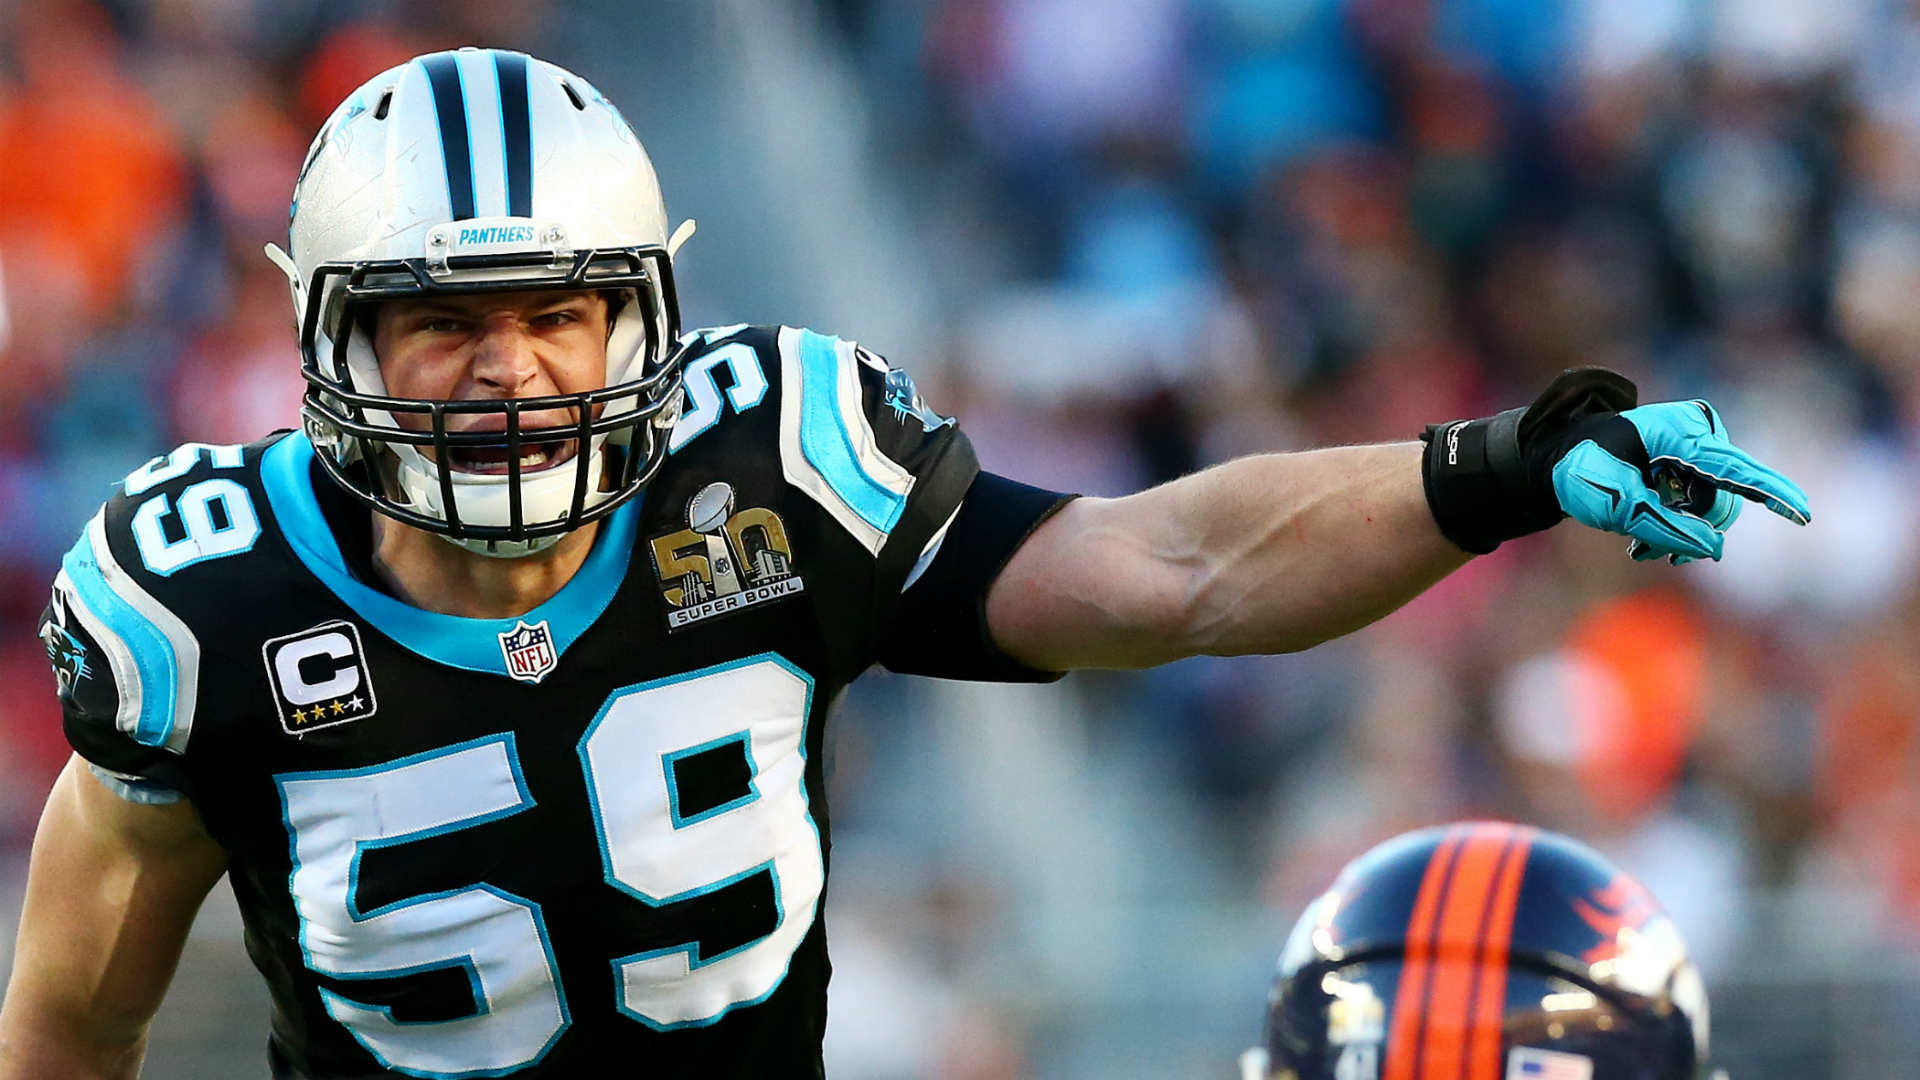 1920x1080 Panthers LB Luke Kuechly to have shoulder surgery, should be ready for camp